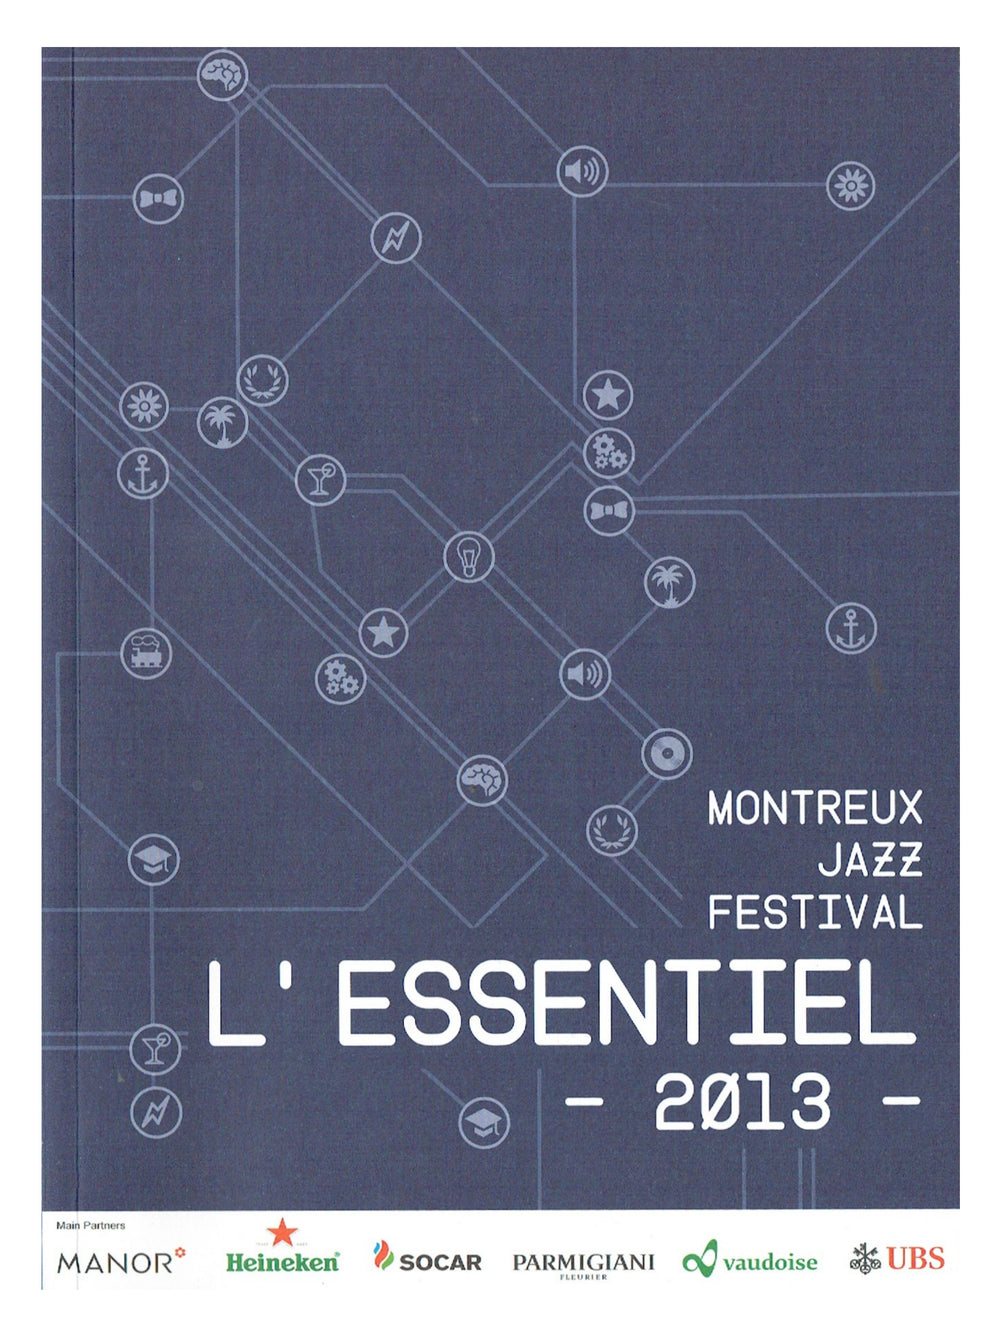 Prince – Montreux Jazz Festival  July 5th - 20th 2013 Official Tour Book